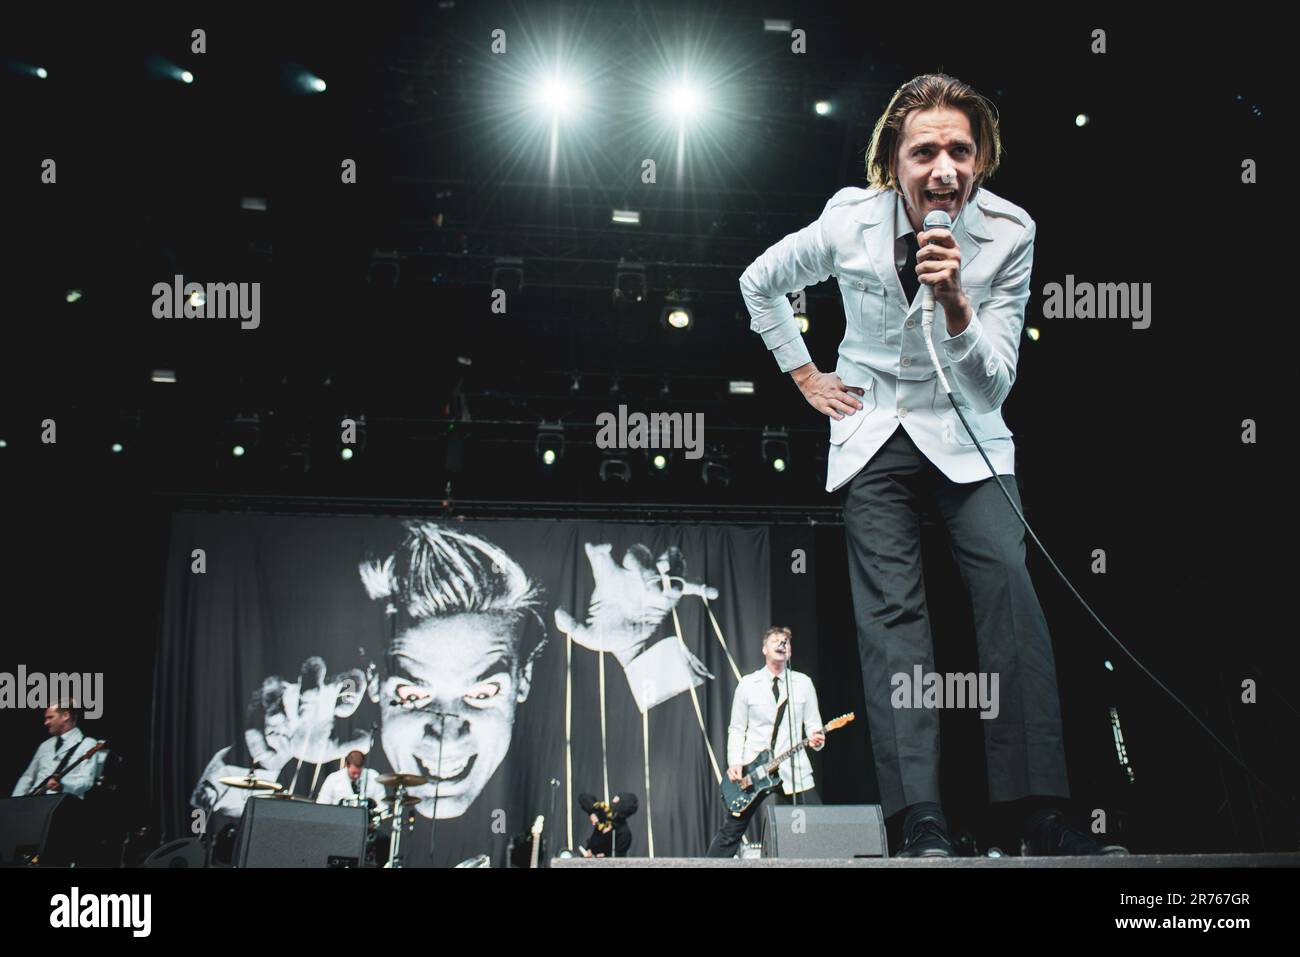 MUNICH, GERMANY ROCKAVARIA FESTIVAL: Per “Pelle” Almqvist, also known as Howlin' Pelle Almqvis, singer of the Swedish band The Hives performing live on stage at the first edition of the Rockavaria Festival. Stock Photo